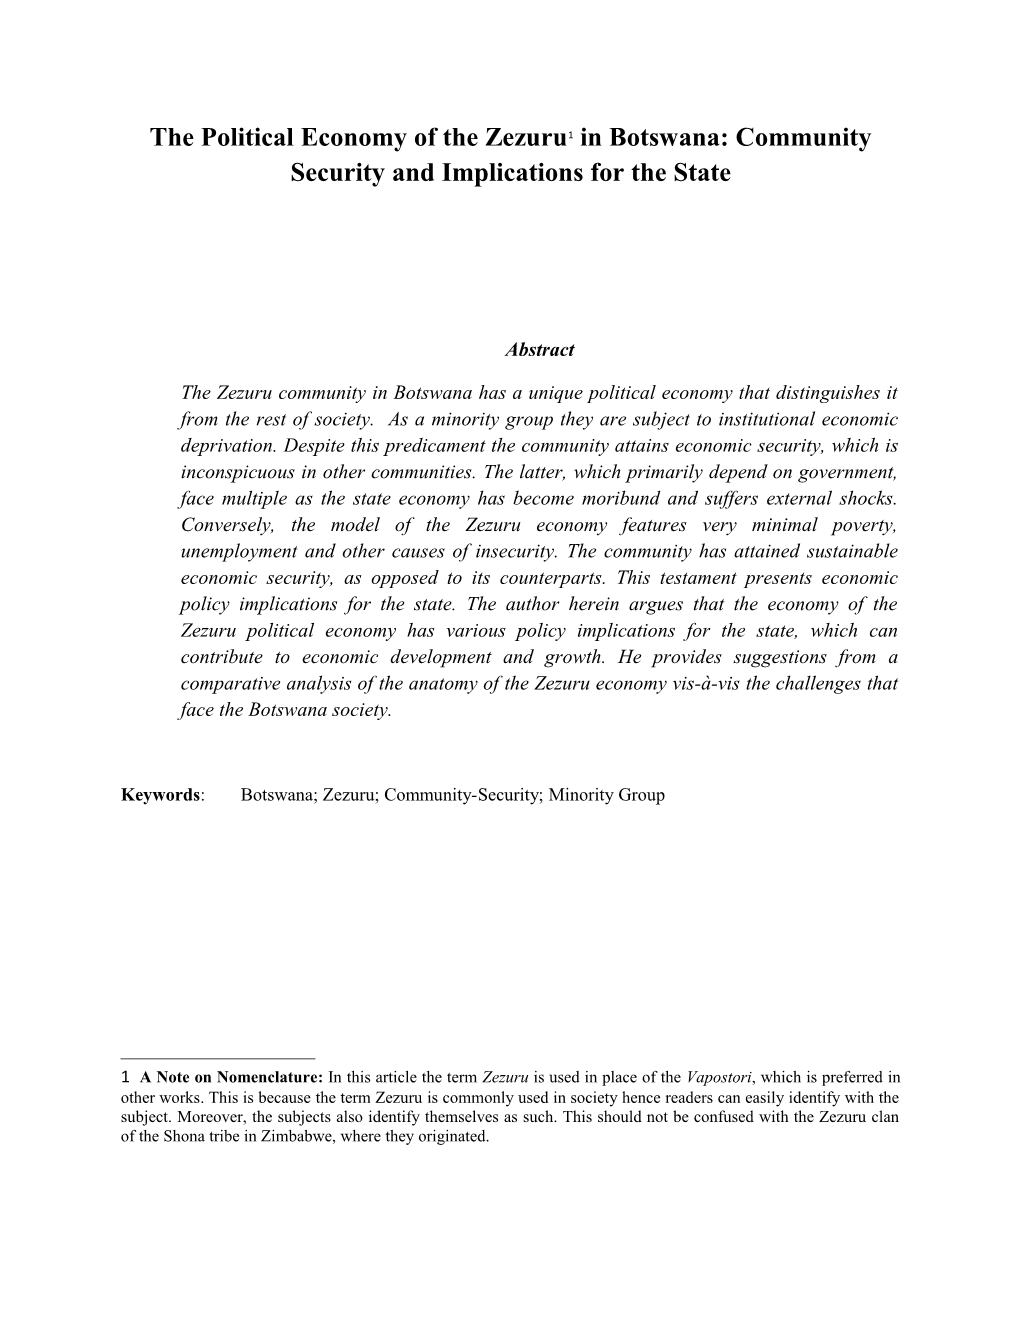 The Political Economy of the Zezuru 1 in Botswana: Community Security and Implications